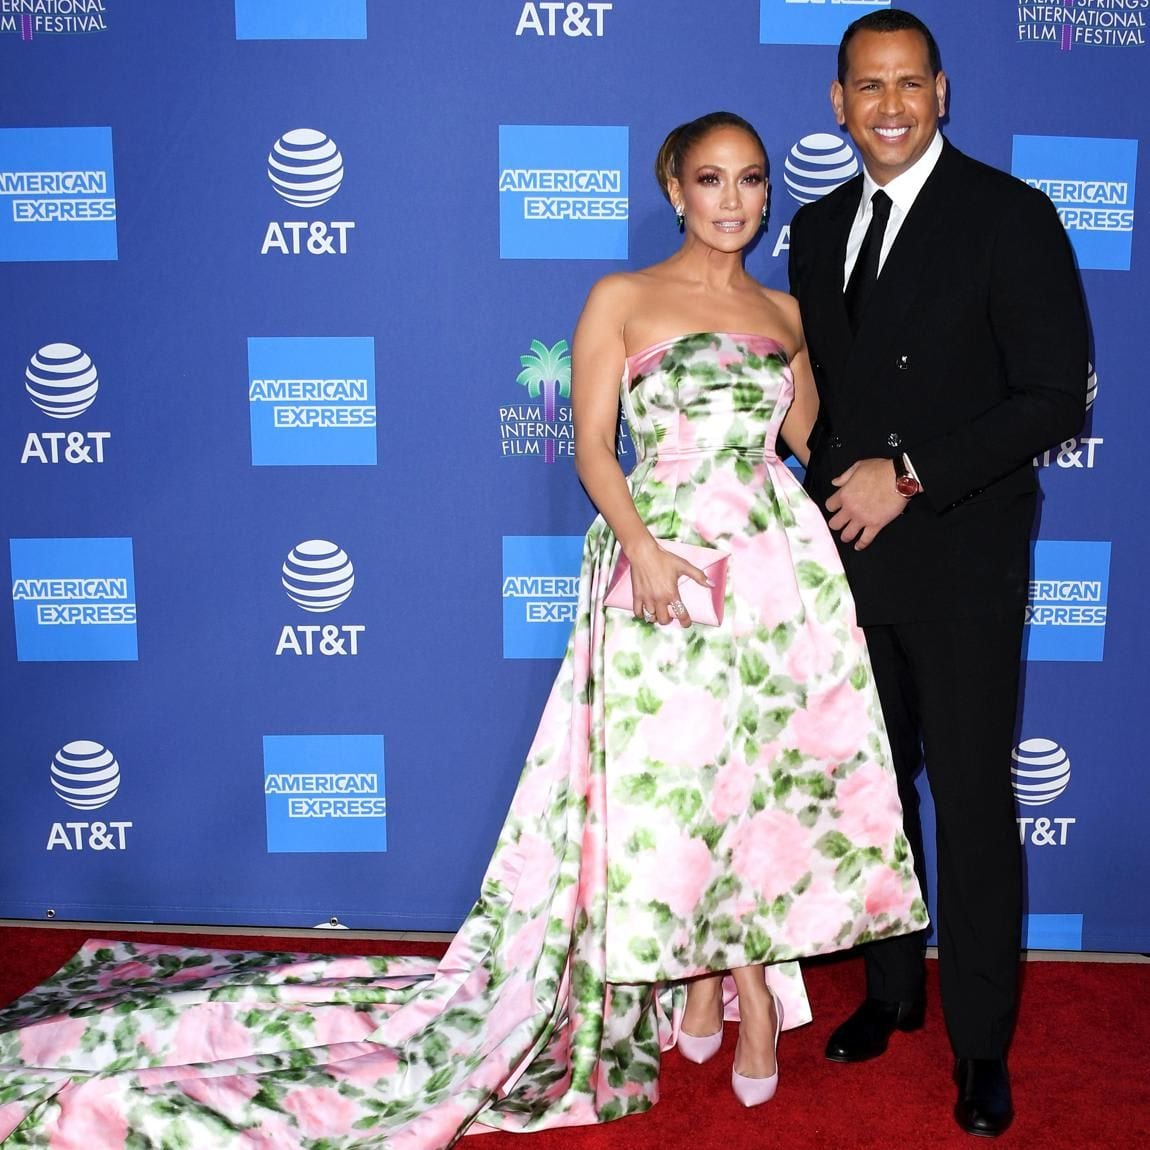 Jennifer Lopez and Alex Rodriguez attend the 31st Annual Palm Springs International Film Festival Film Awards Gala at Palm Springs Convention Center